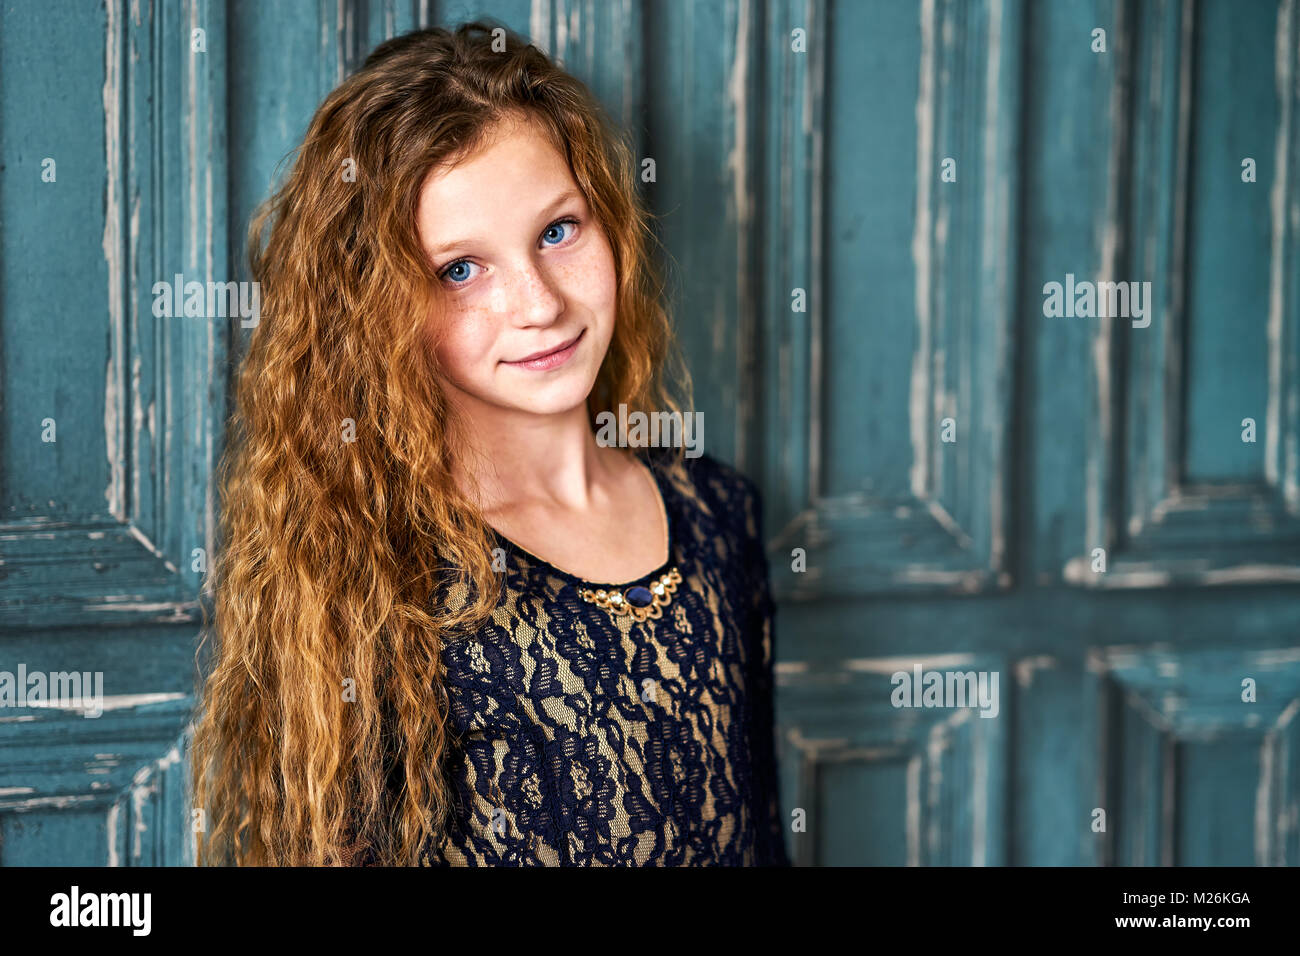 Portrait of red-haired girl Stock Photo